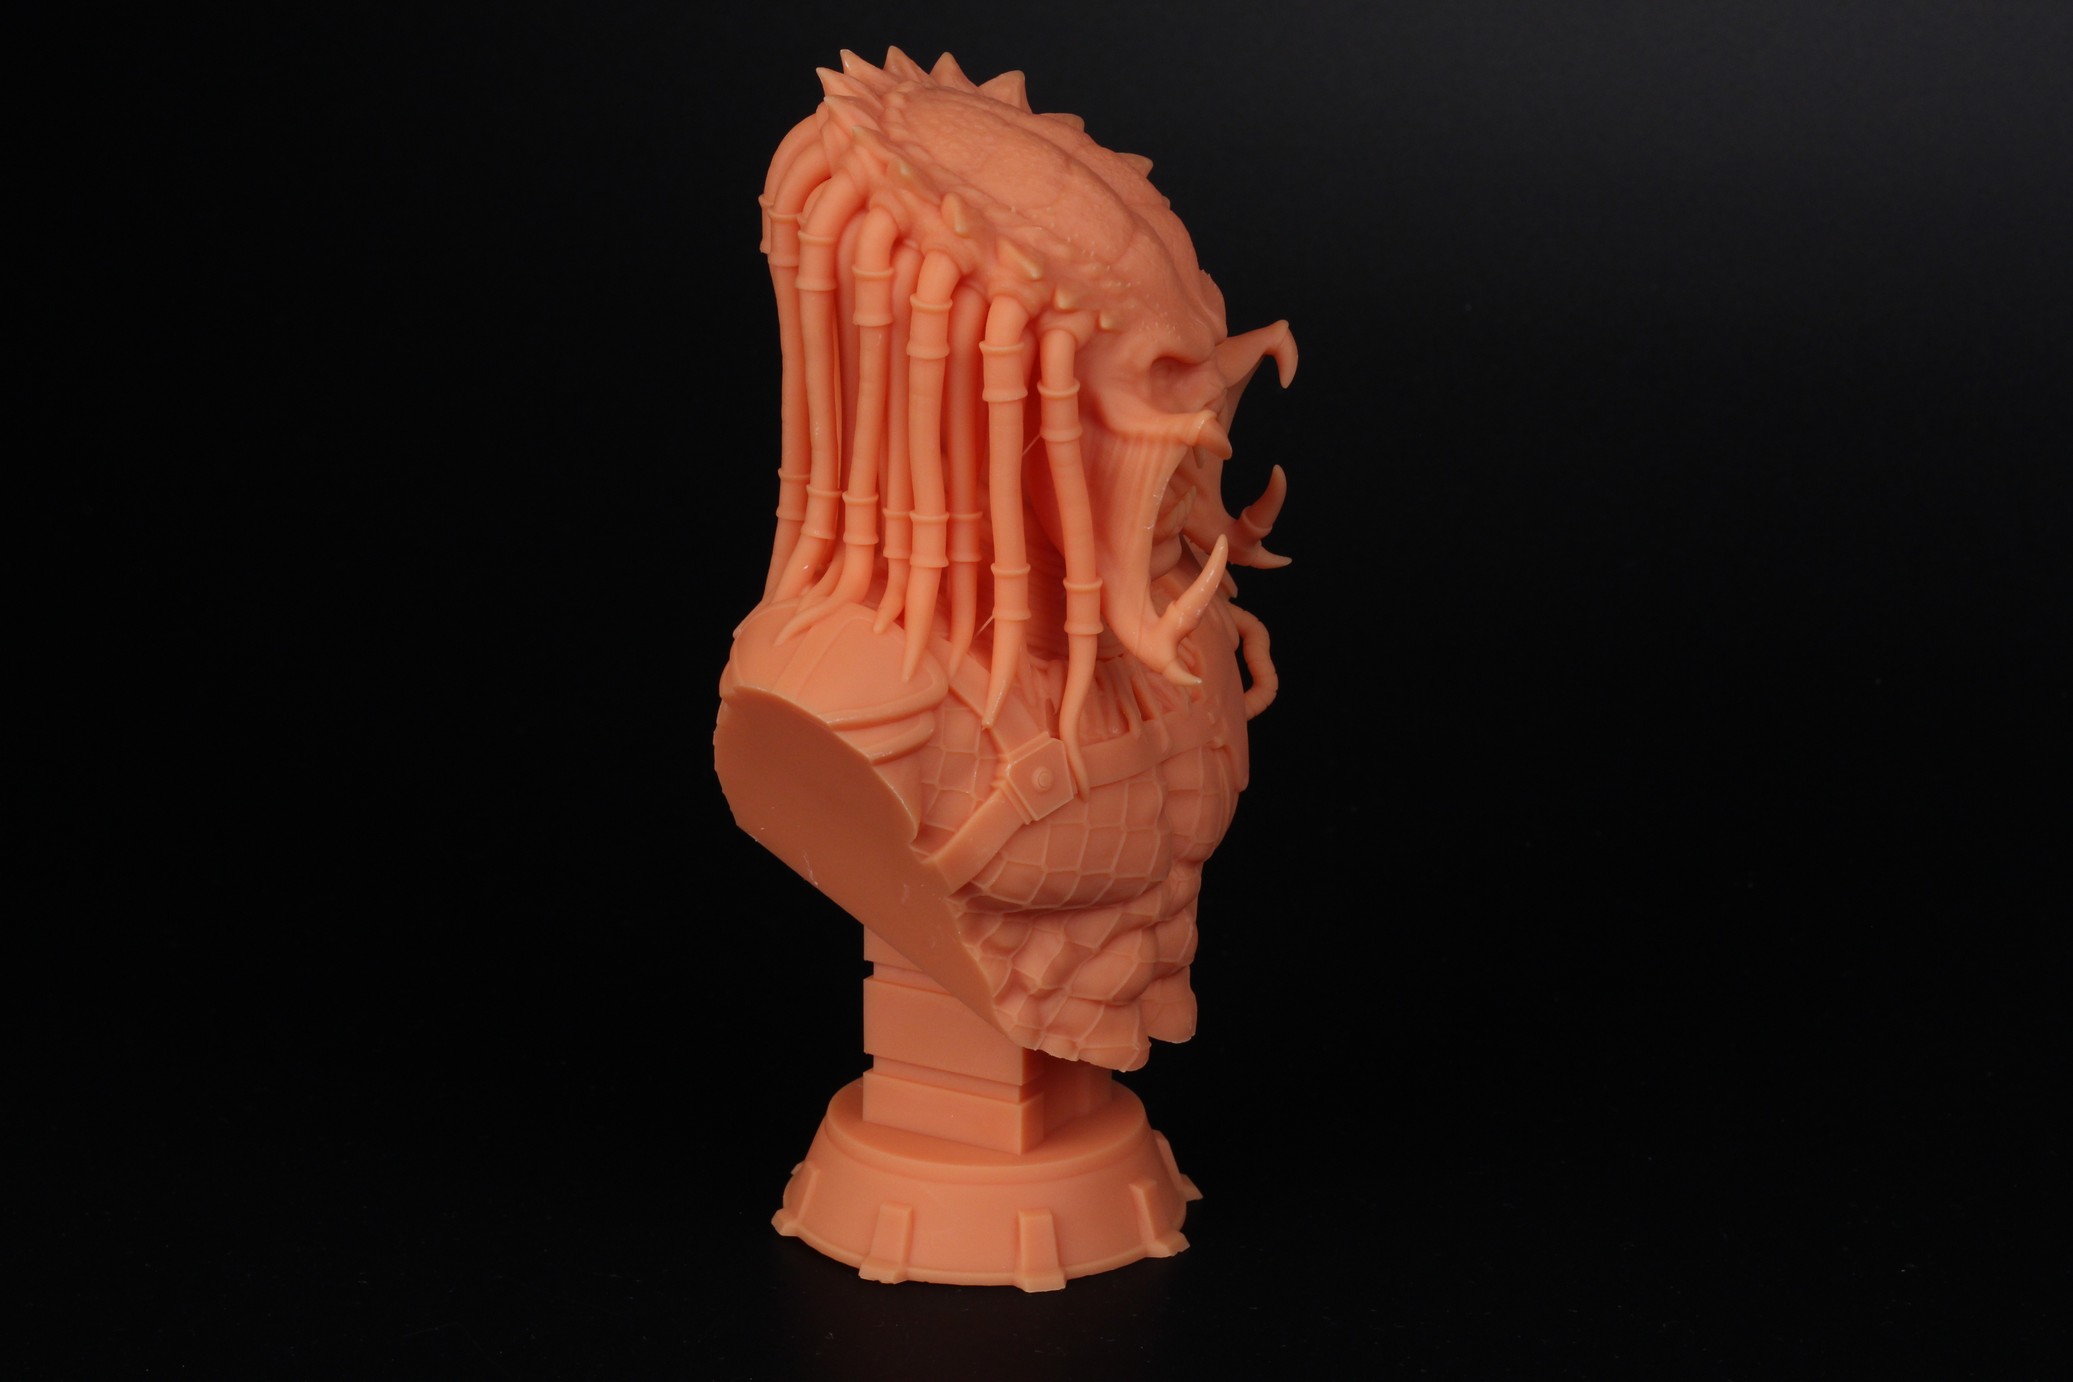 Predator Bust Anycubic Photon M3 Max Review 4 | Anycubic Photon M3 Max Review: Who Needs FDM Anymore?